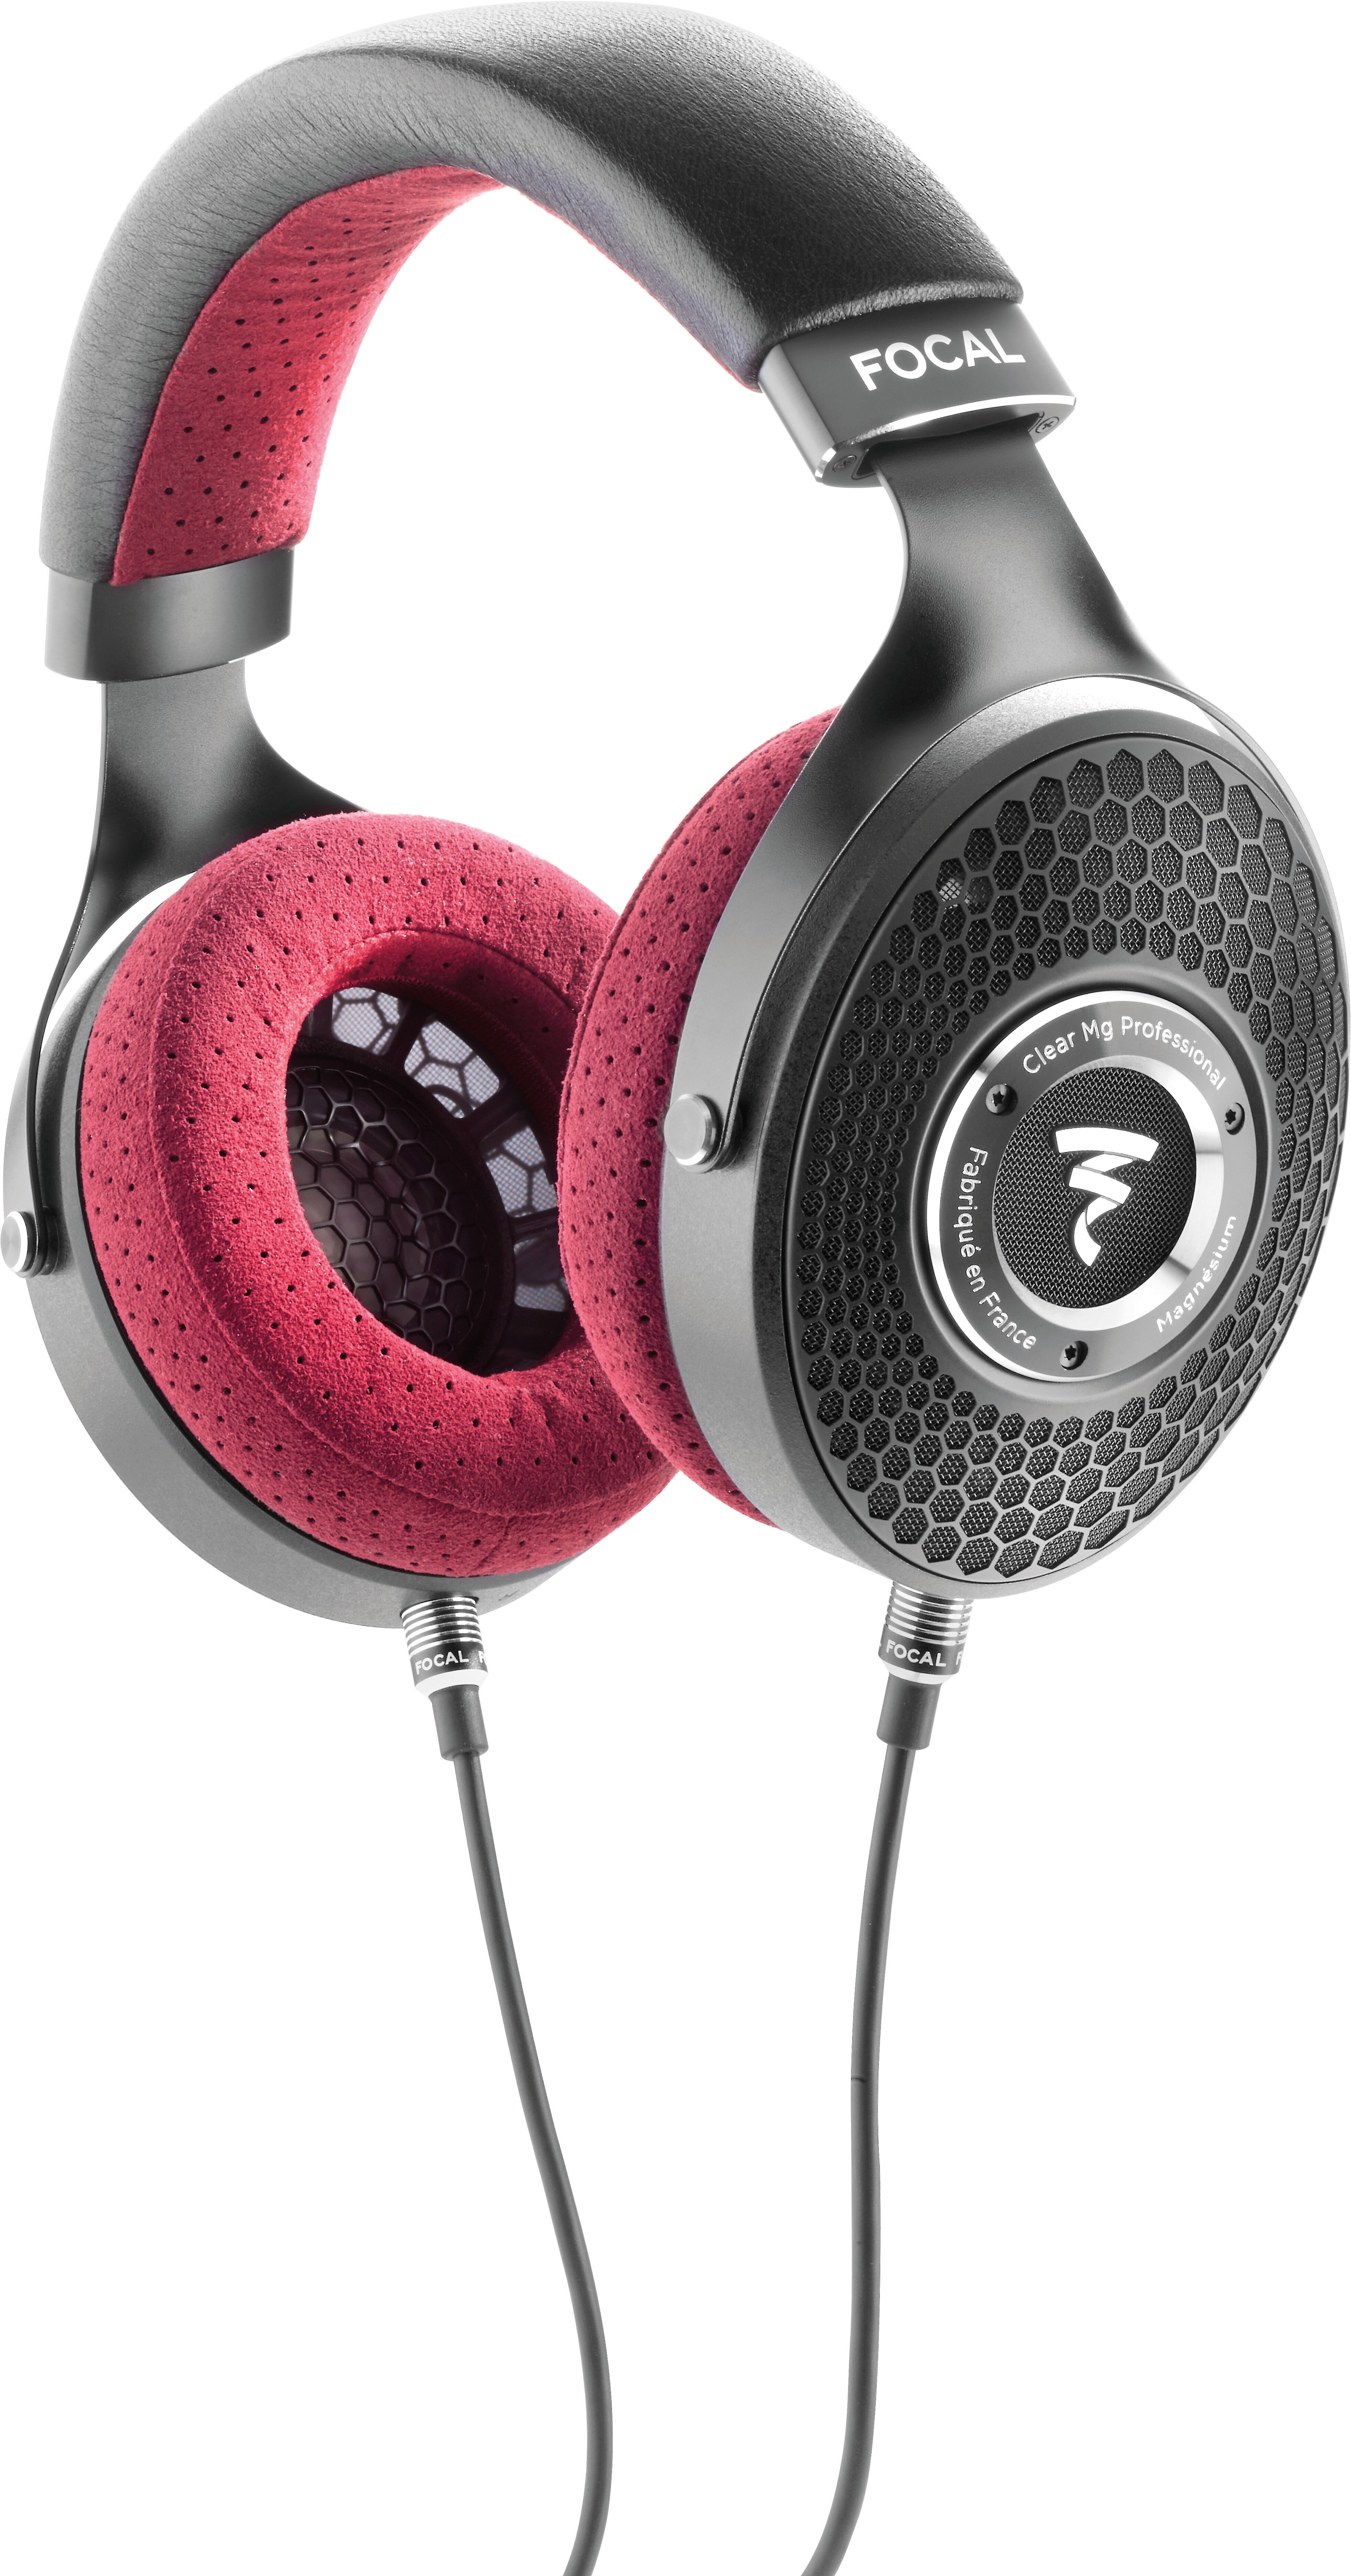 Customer Reviews: Focal Clear MG Professional Open-back over-ear